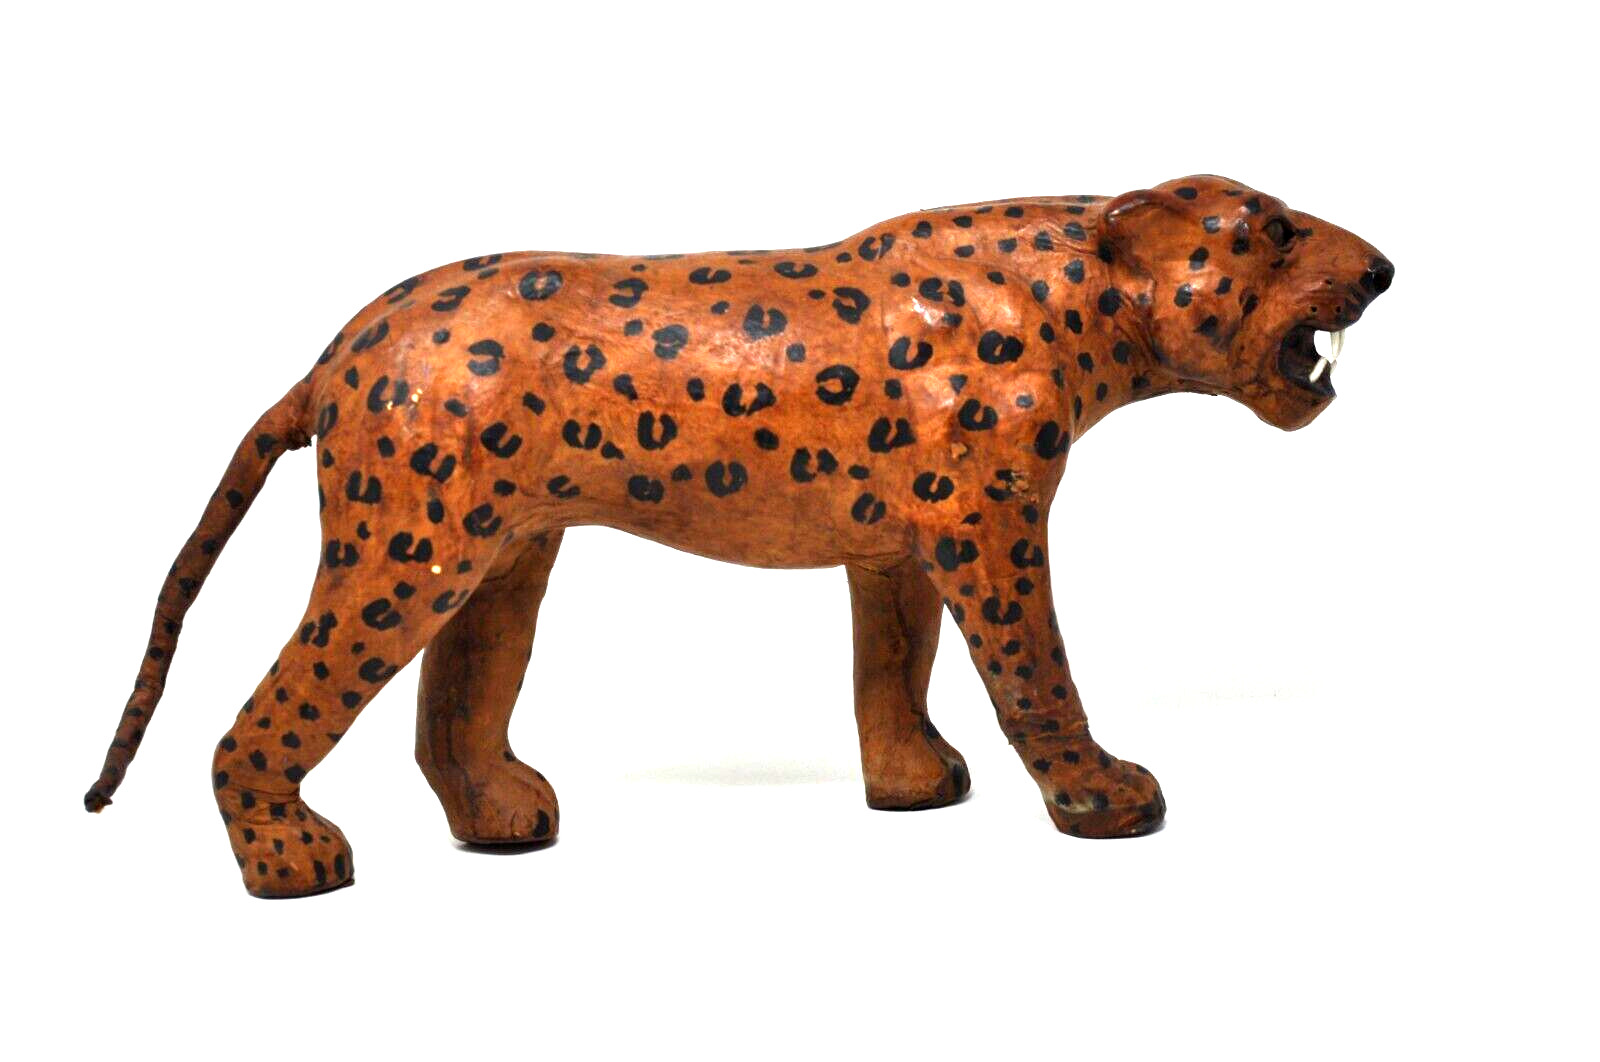 Vintage Leather Wrapped Leopard Jaguar Big Cat Figurine, In Preowned Condition.